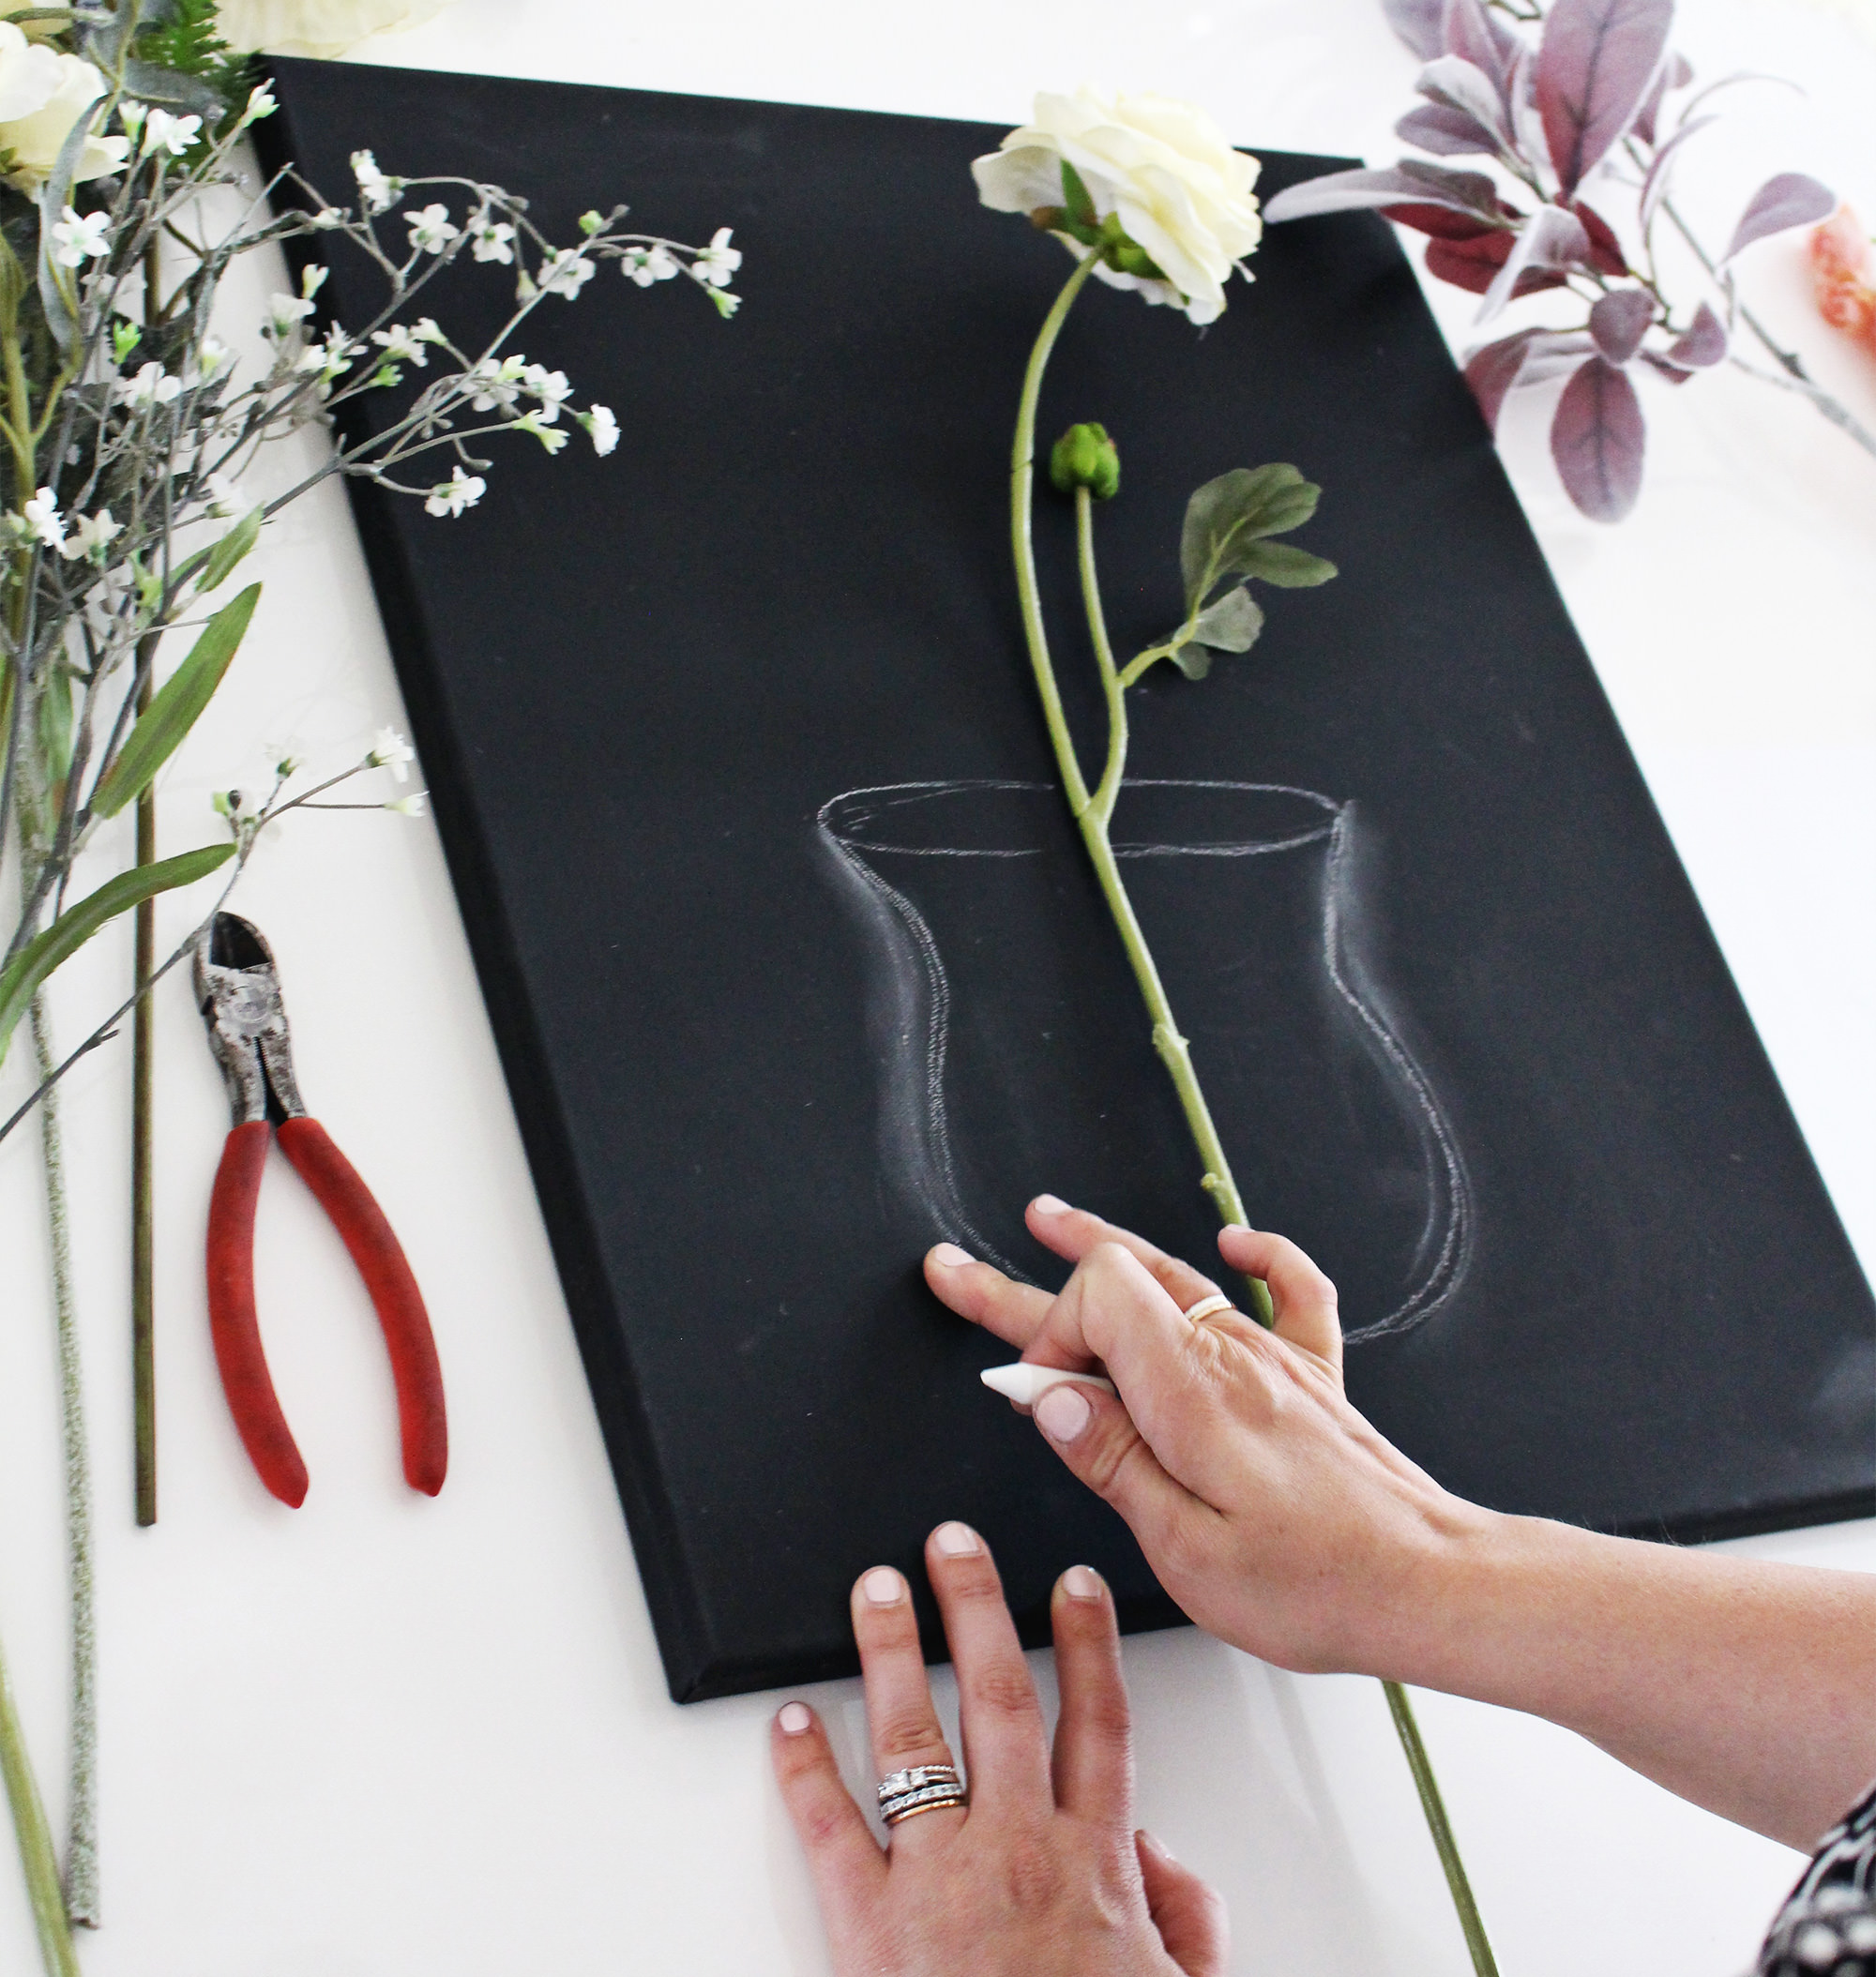 Fun fact: You can use chalk on a black canvas to achieve an authentic chalkboard art look that won't smudge as easily!